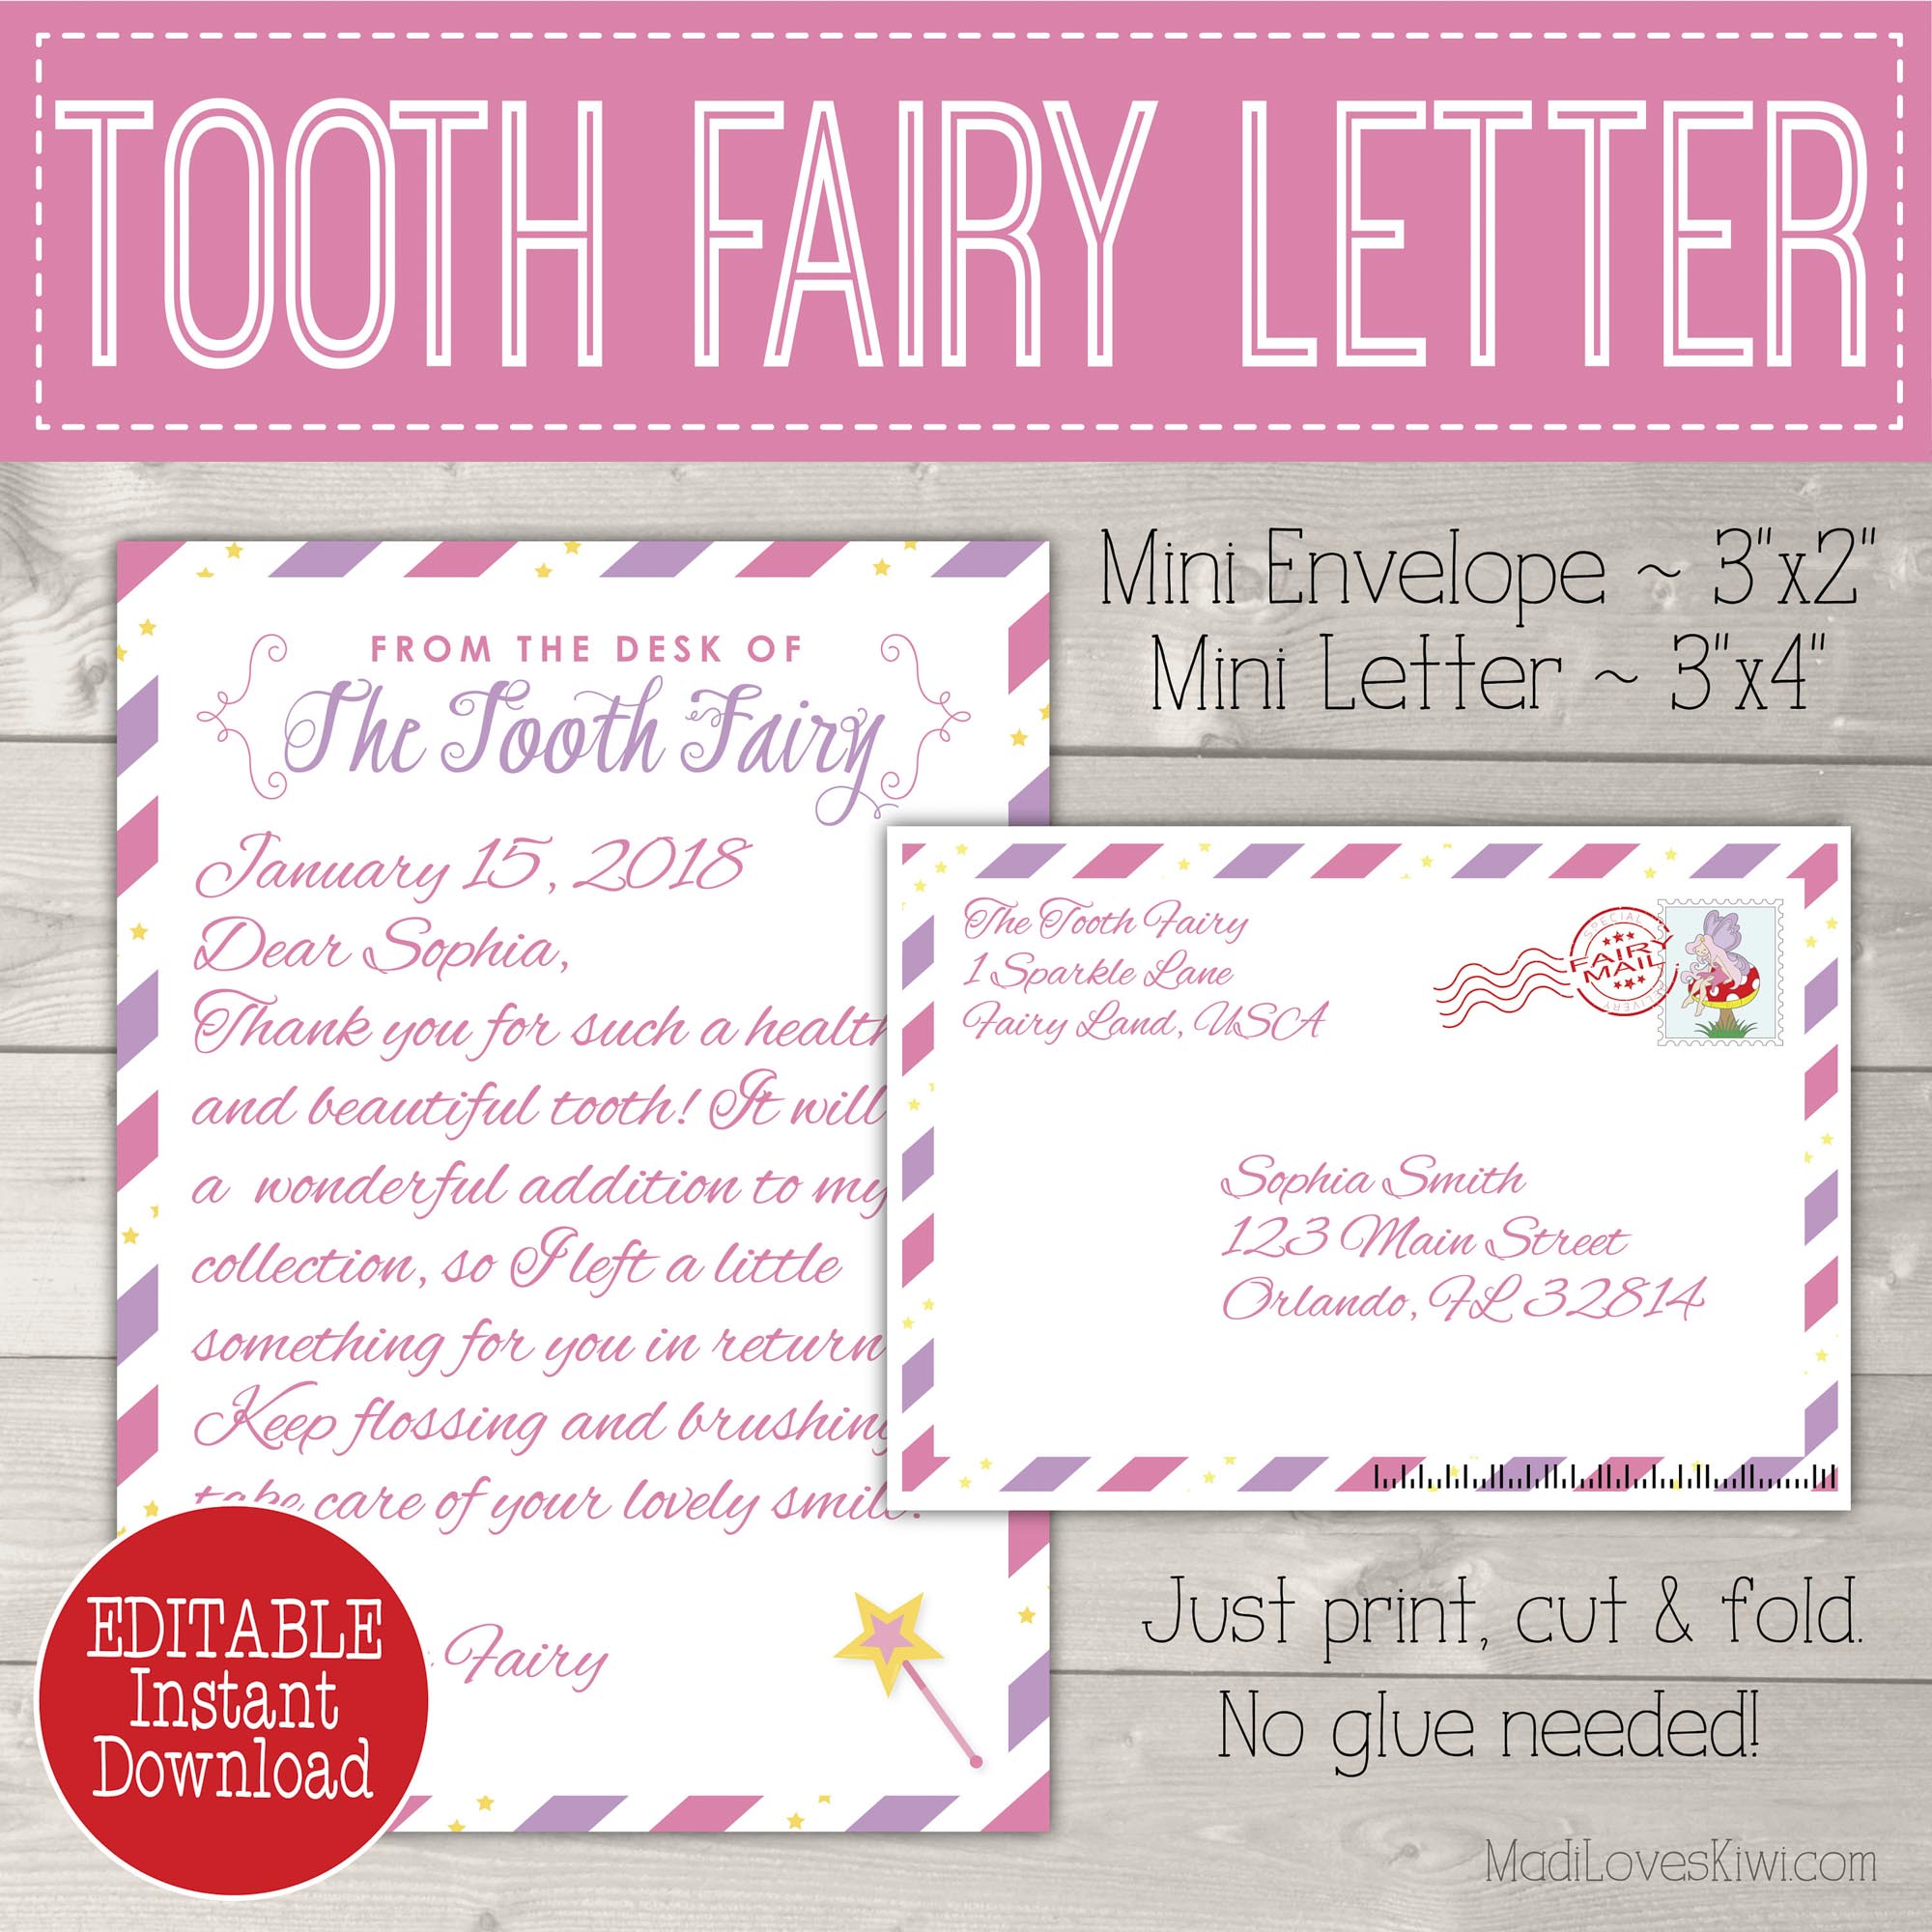 tooth-fairy-letter-template-free-infoupdate